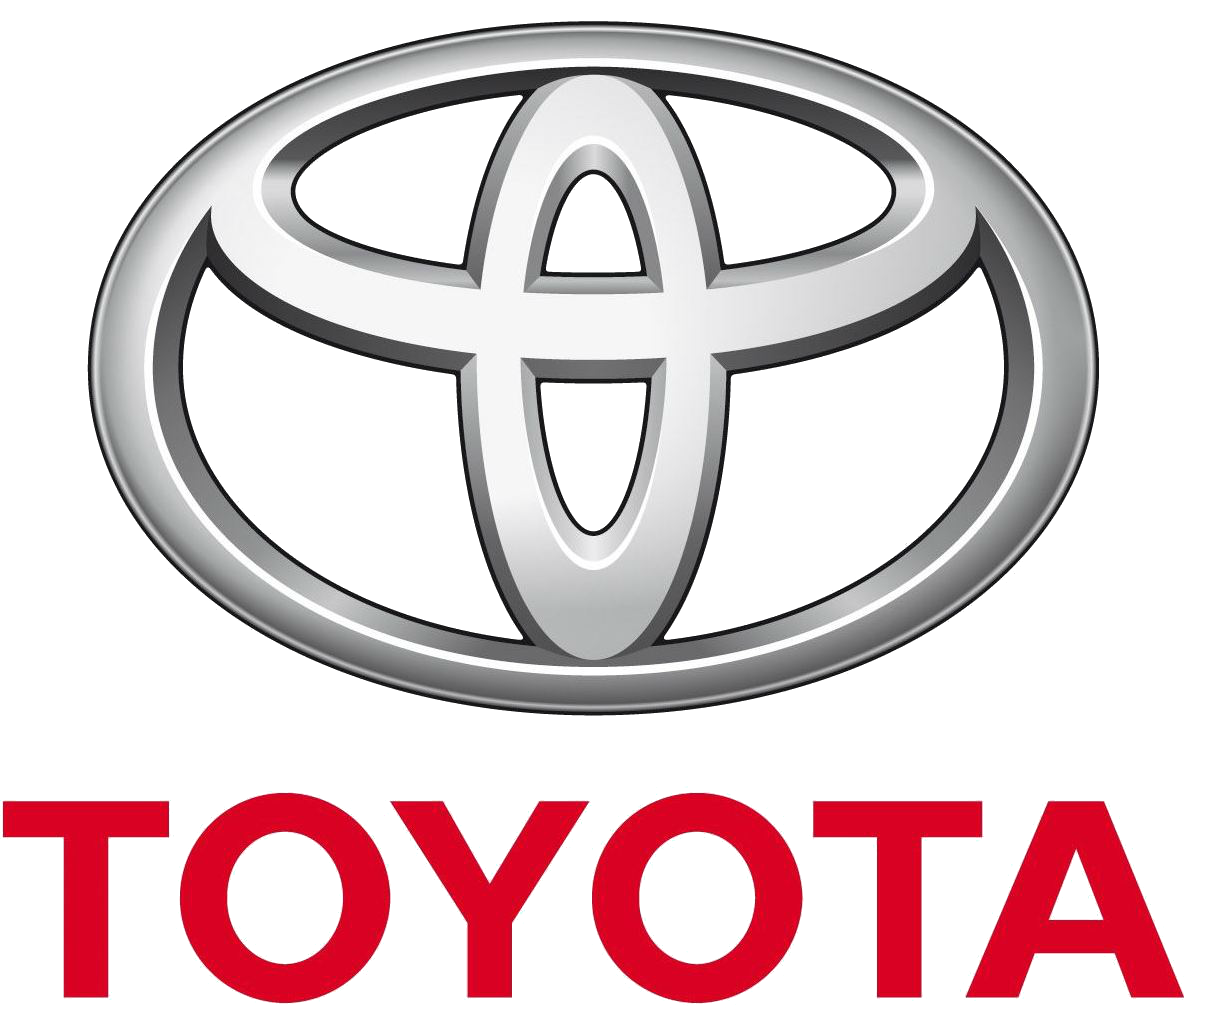 the meaning of toyota logo #6